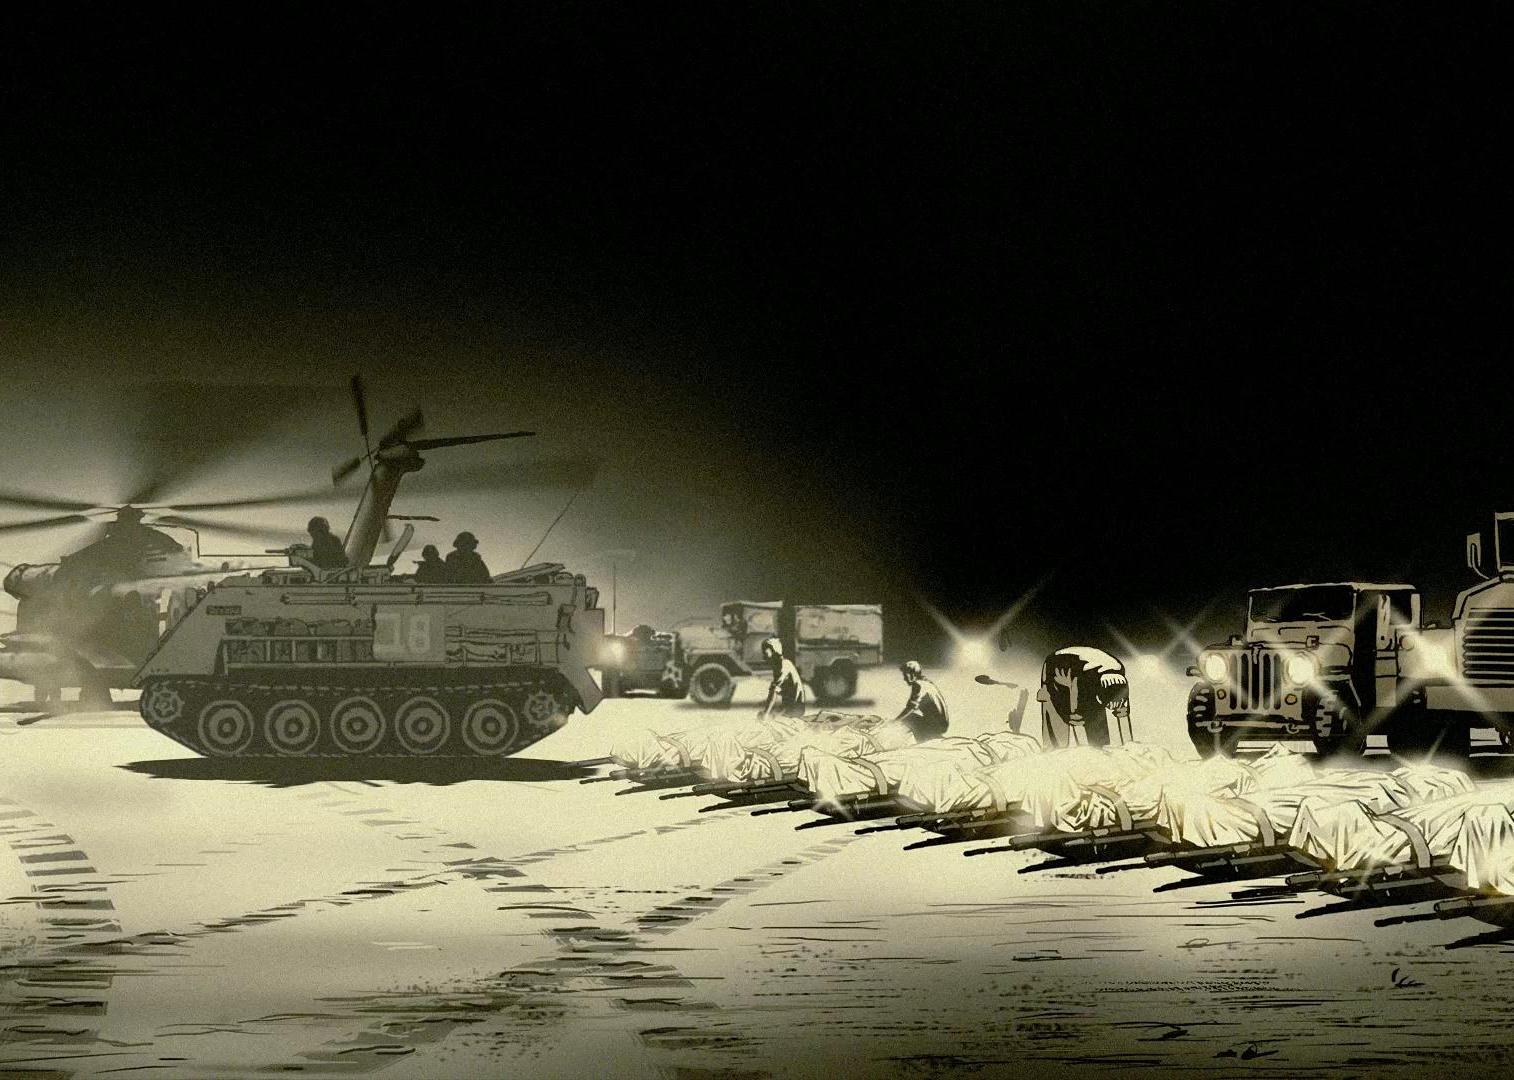 An illustration of tanks, military vehicles, and soldiers in war.